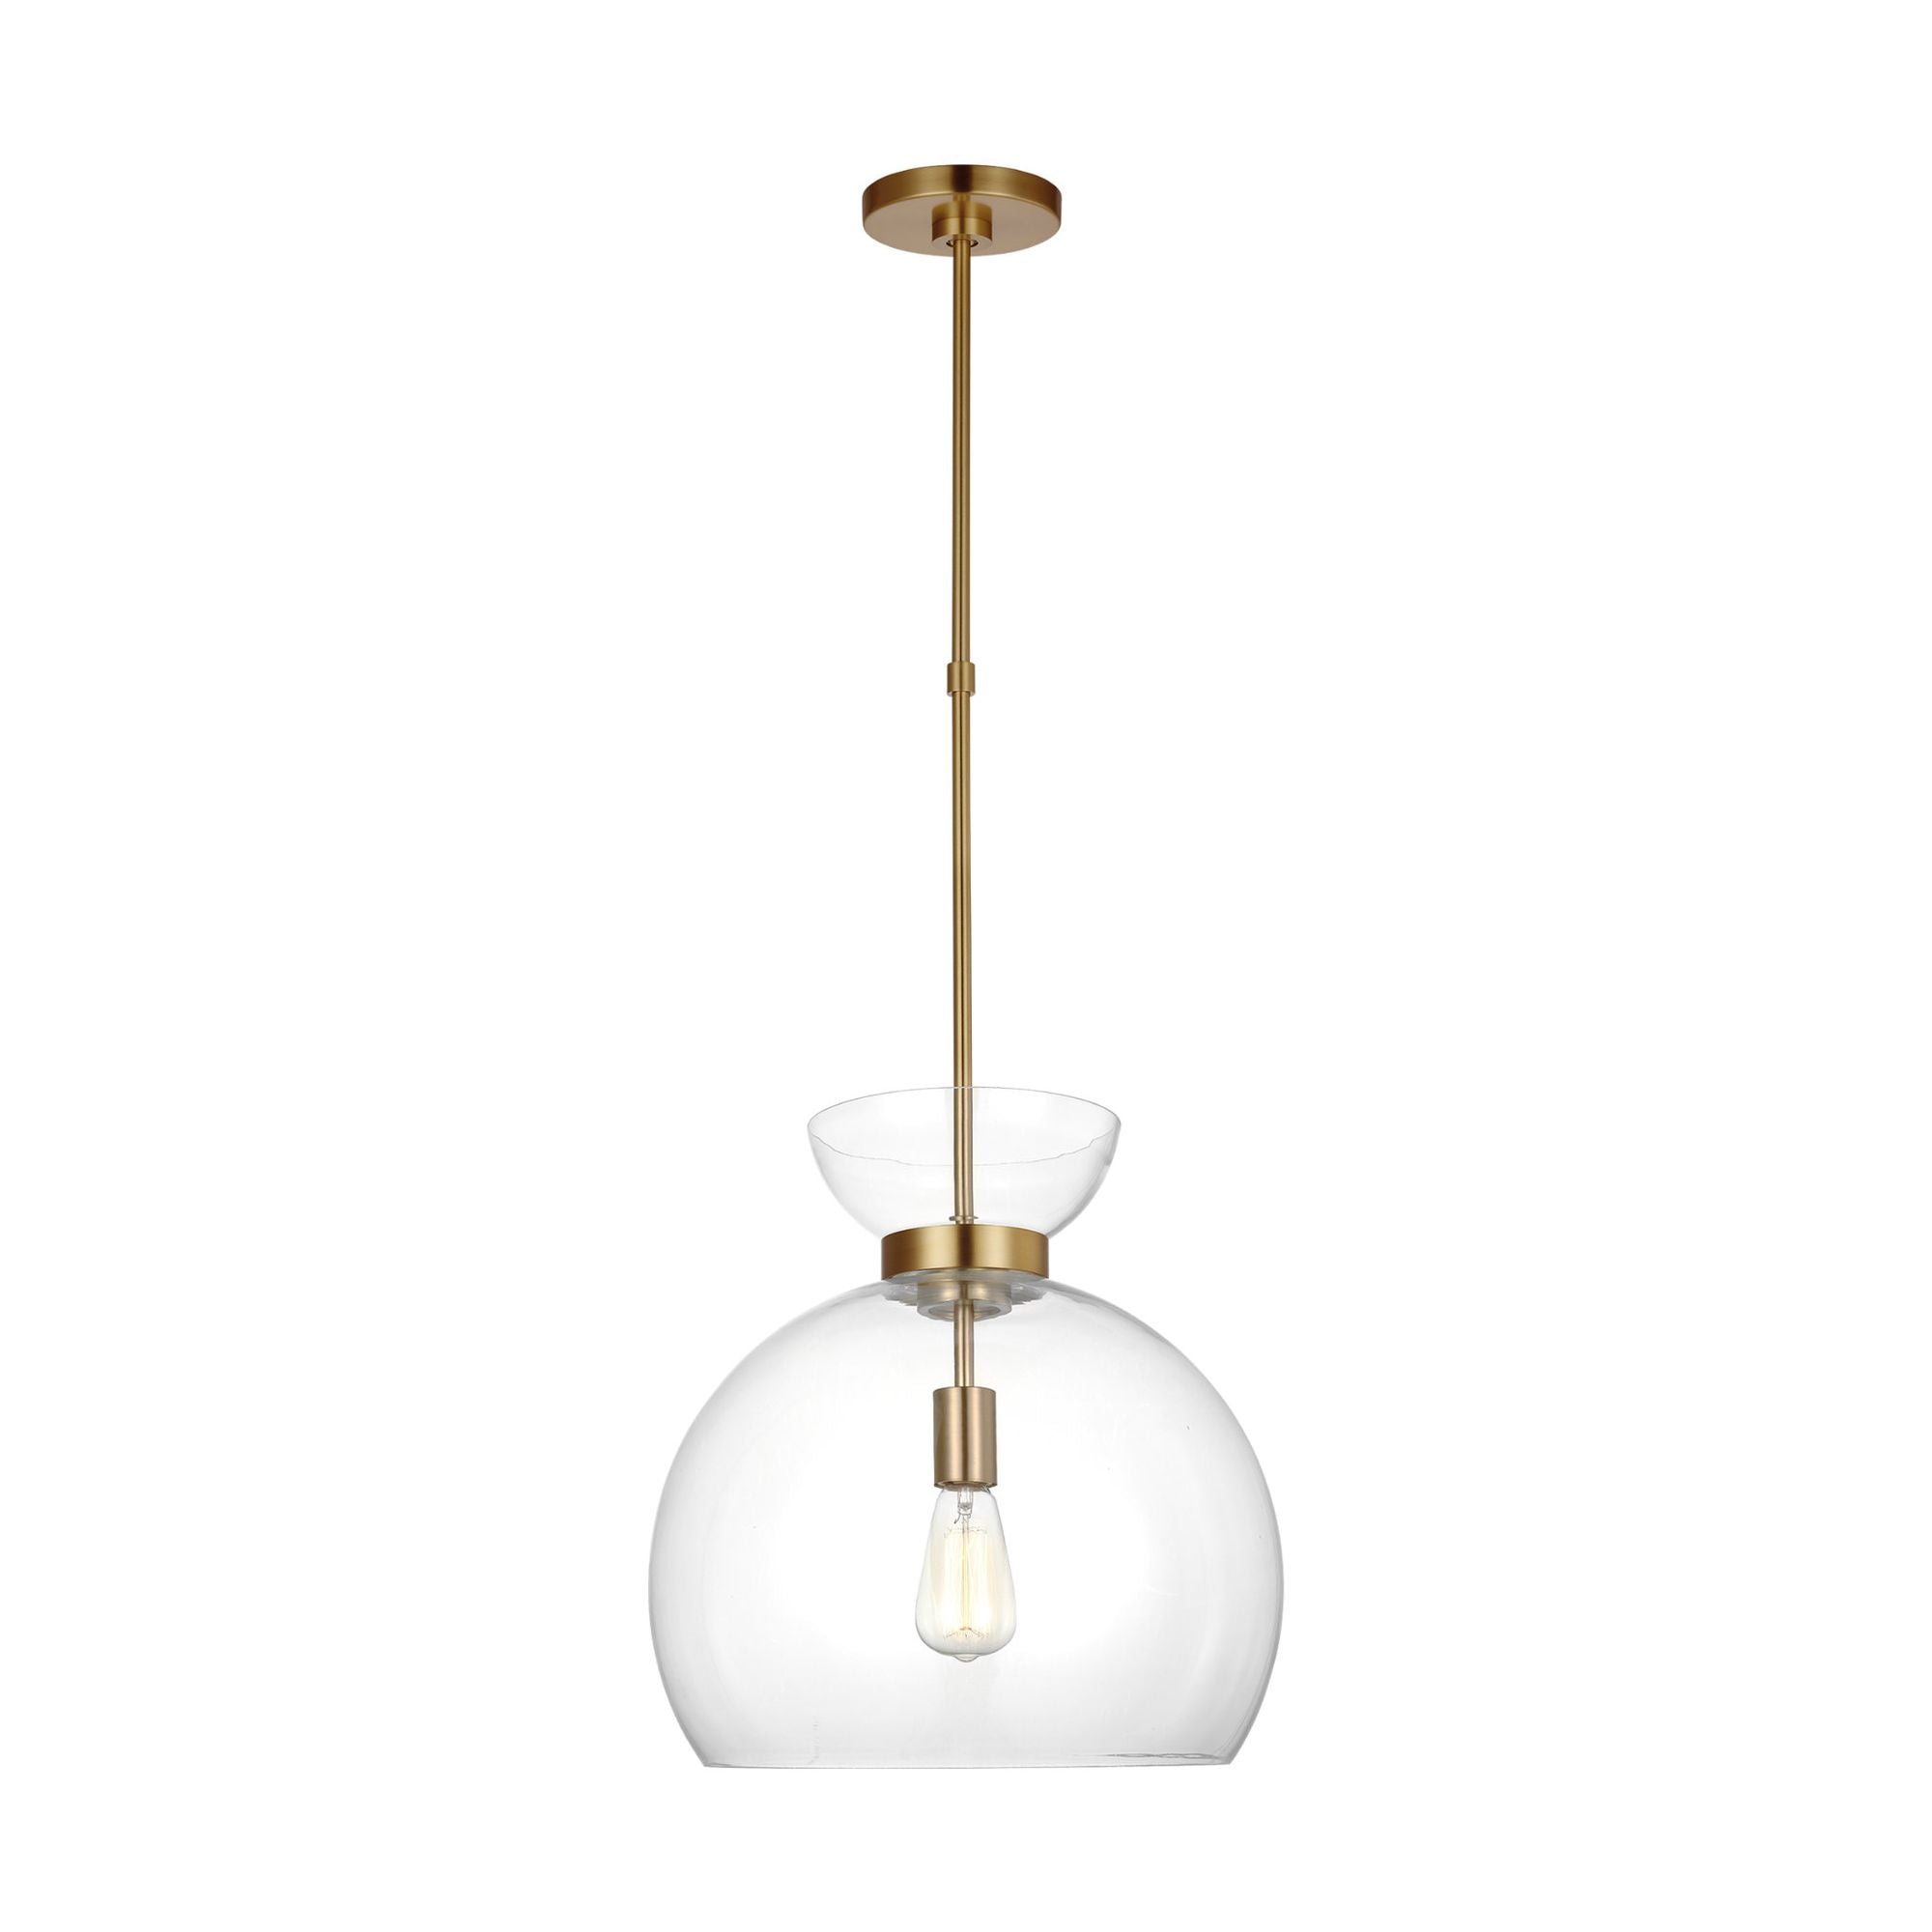 kate spade new york Londyn Round Pendant in Burnished Brass with Clear Glass